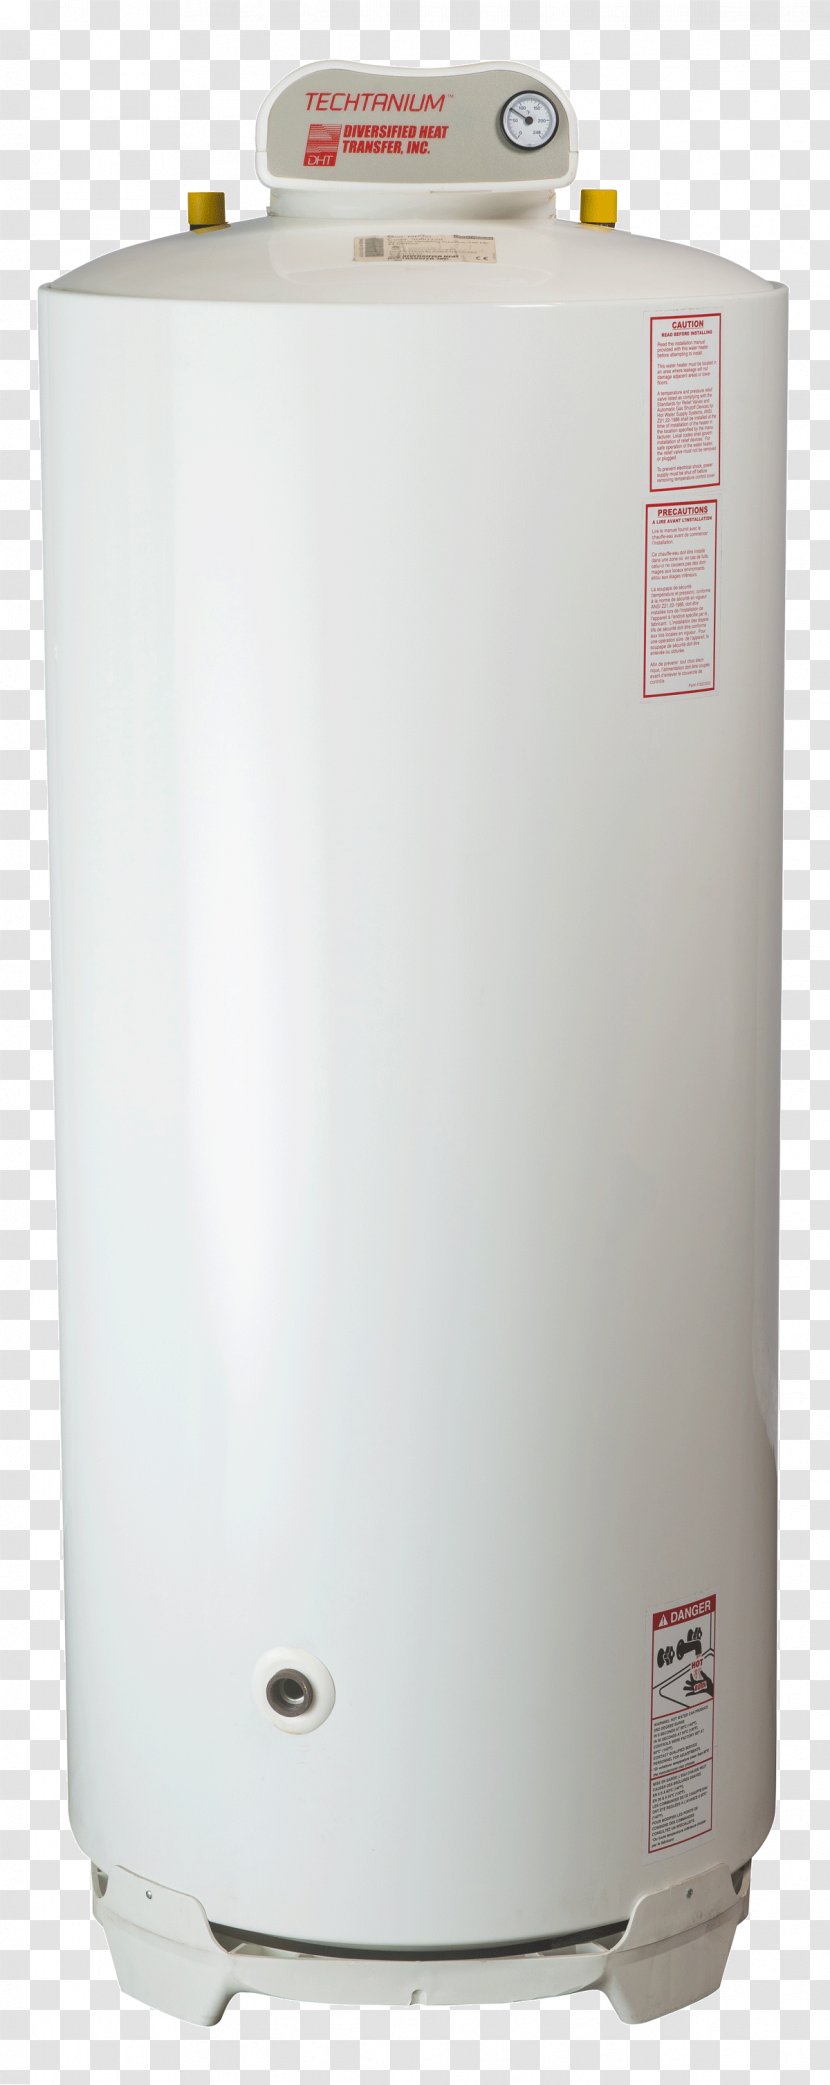 Cylinder - Gas - Water Heater Transparent PNG